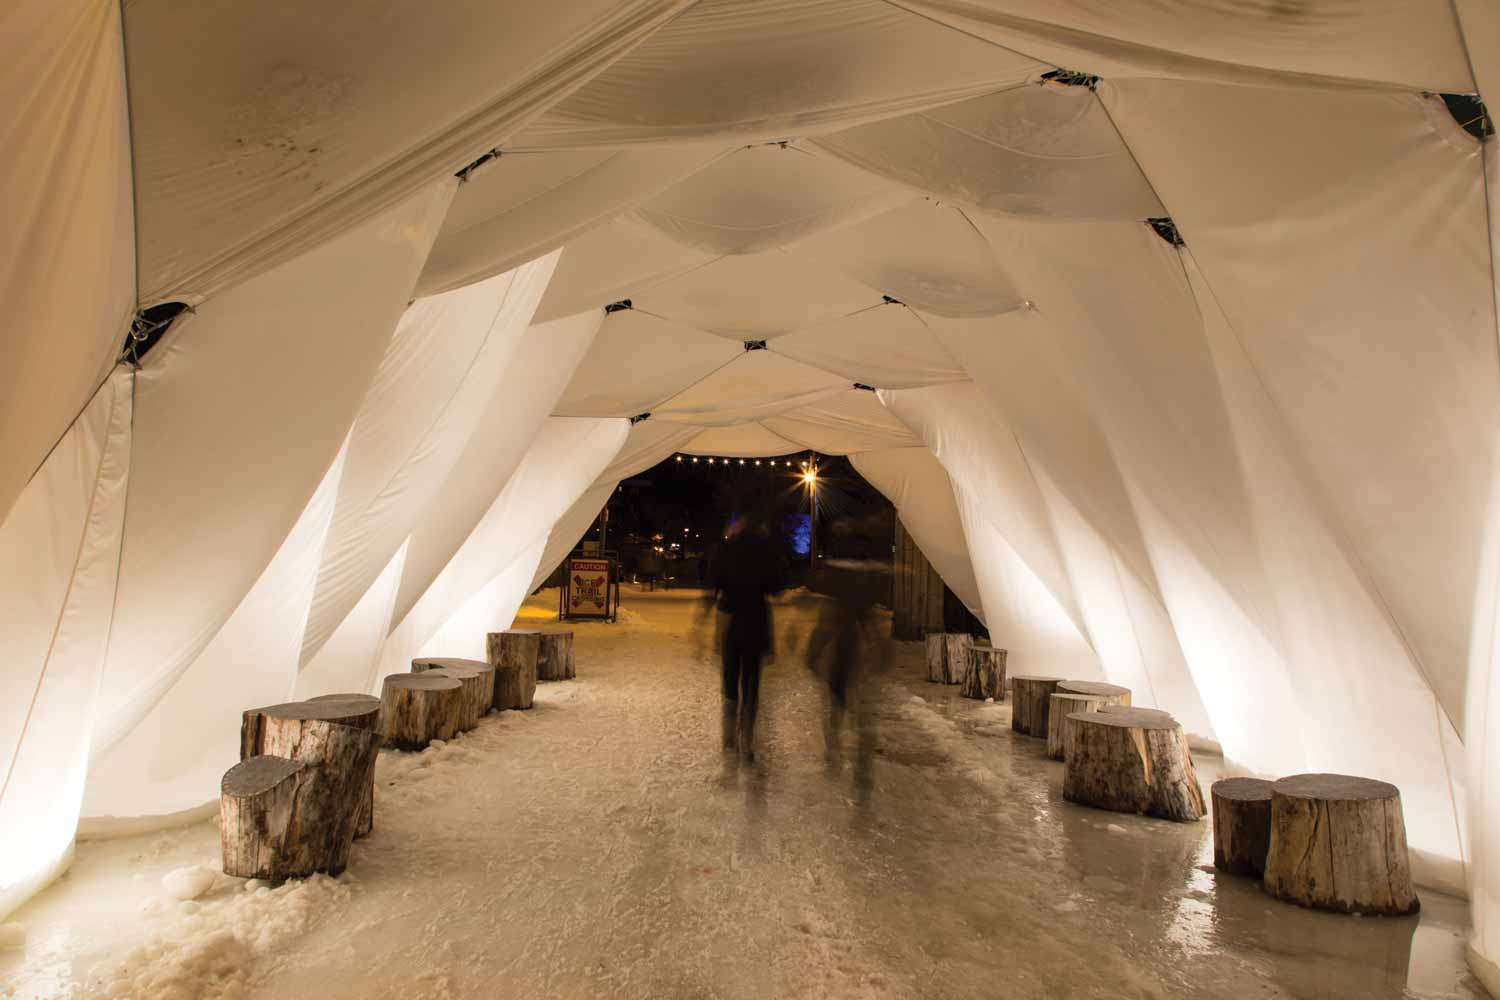 Two people skate along the river trail through a white tent that looks folded like origami. Stumps of wood line the trail.